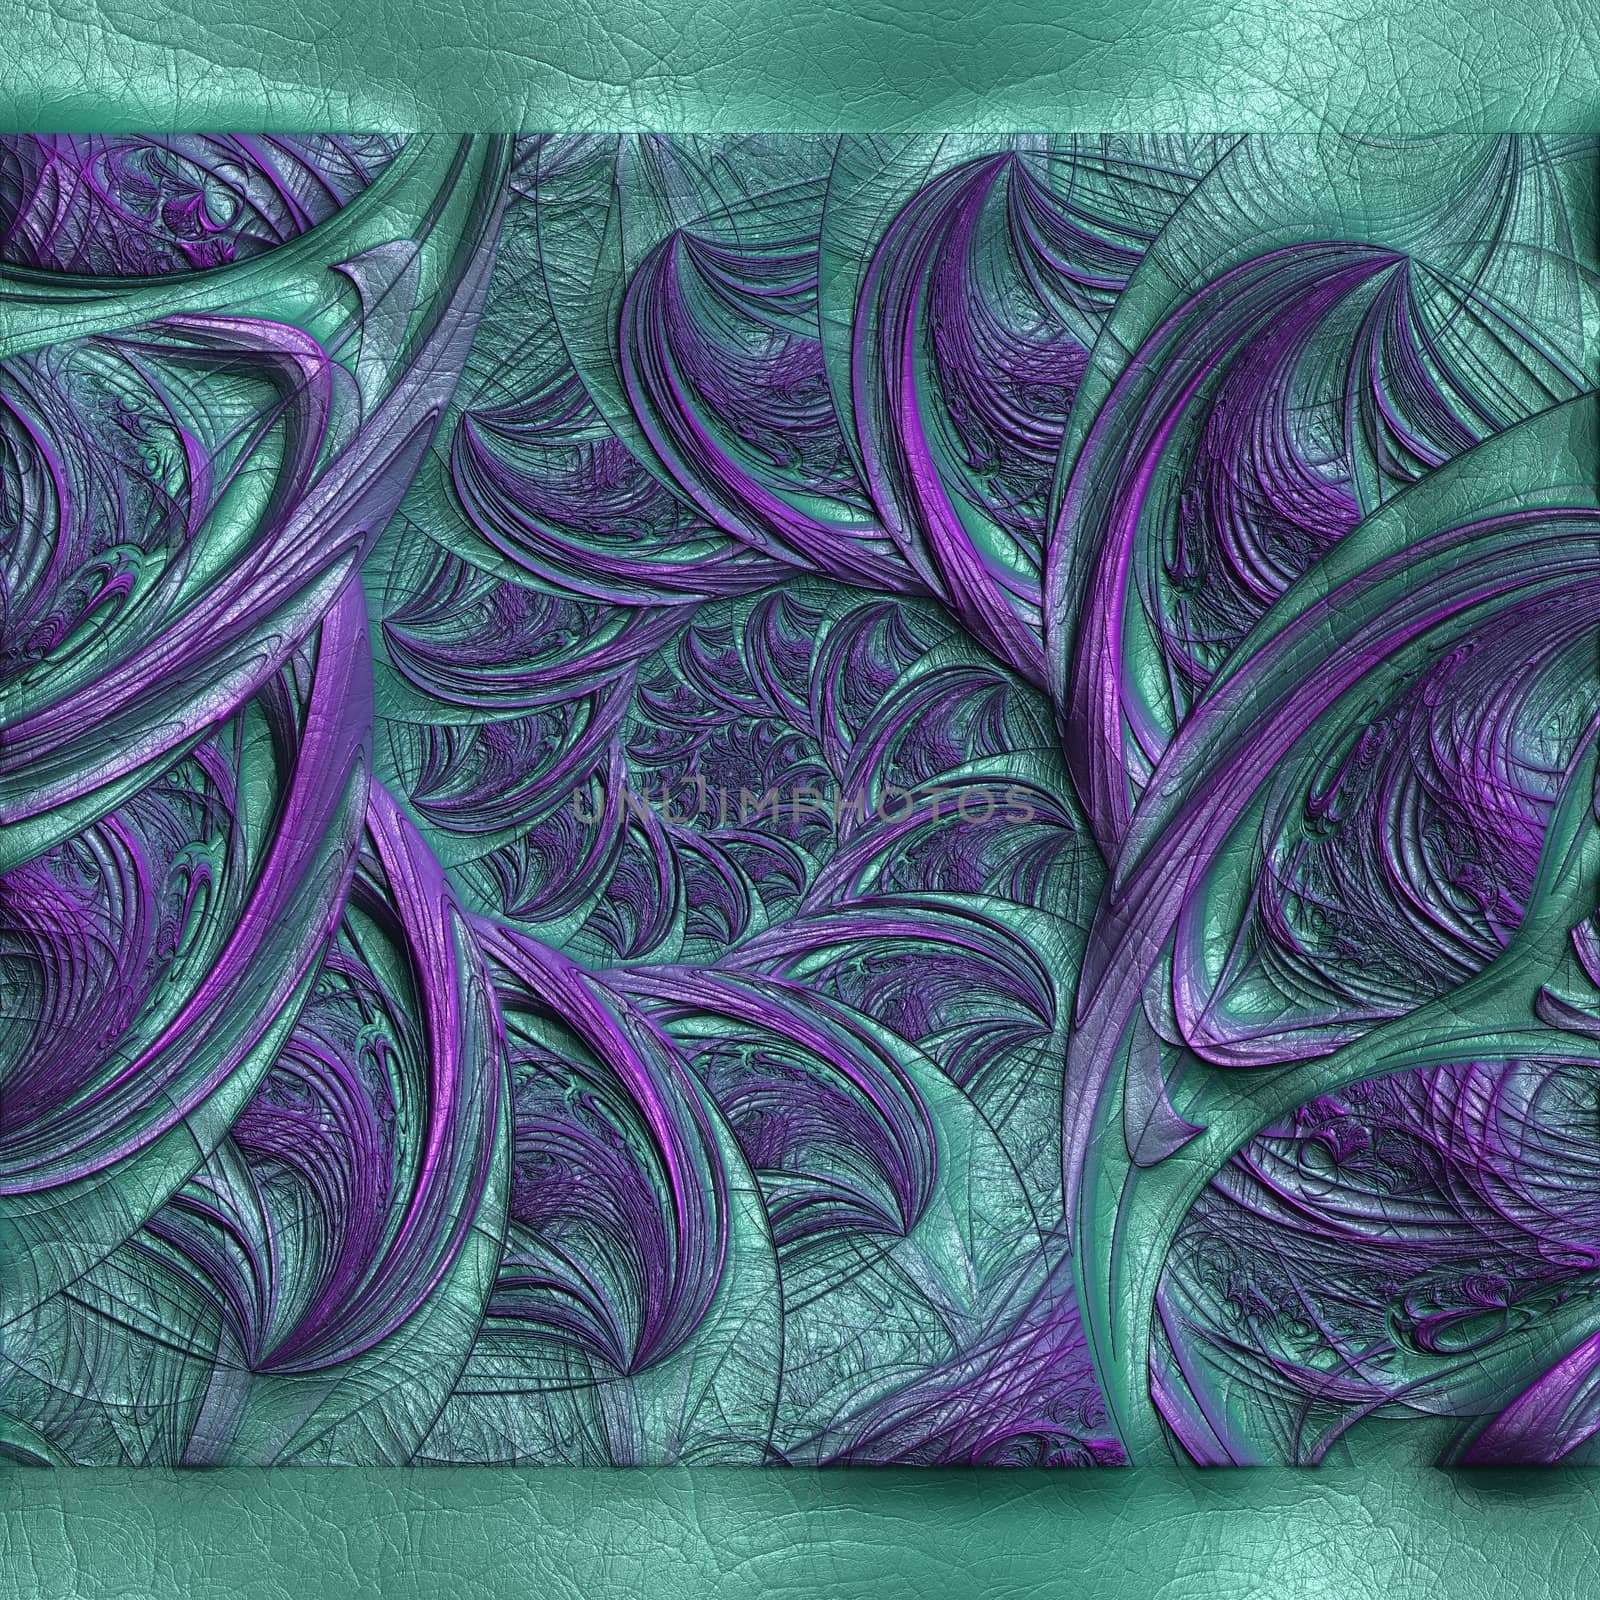 Luxury background with embossed fractal pattern on leather